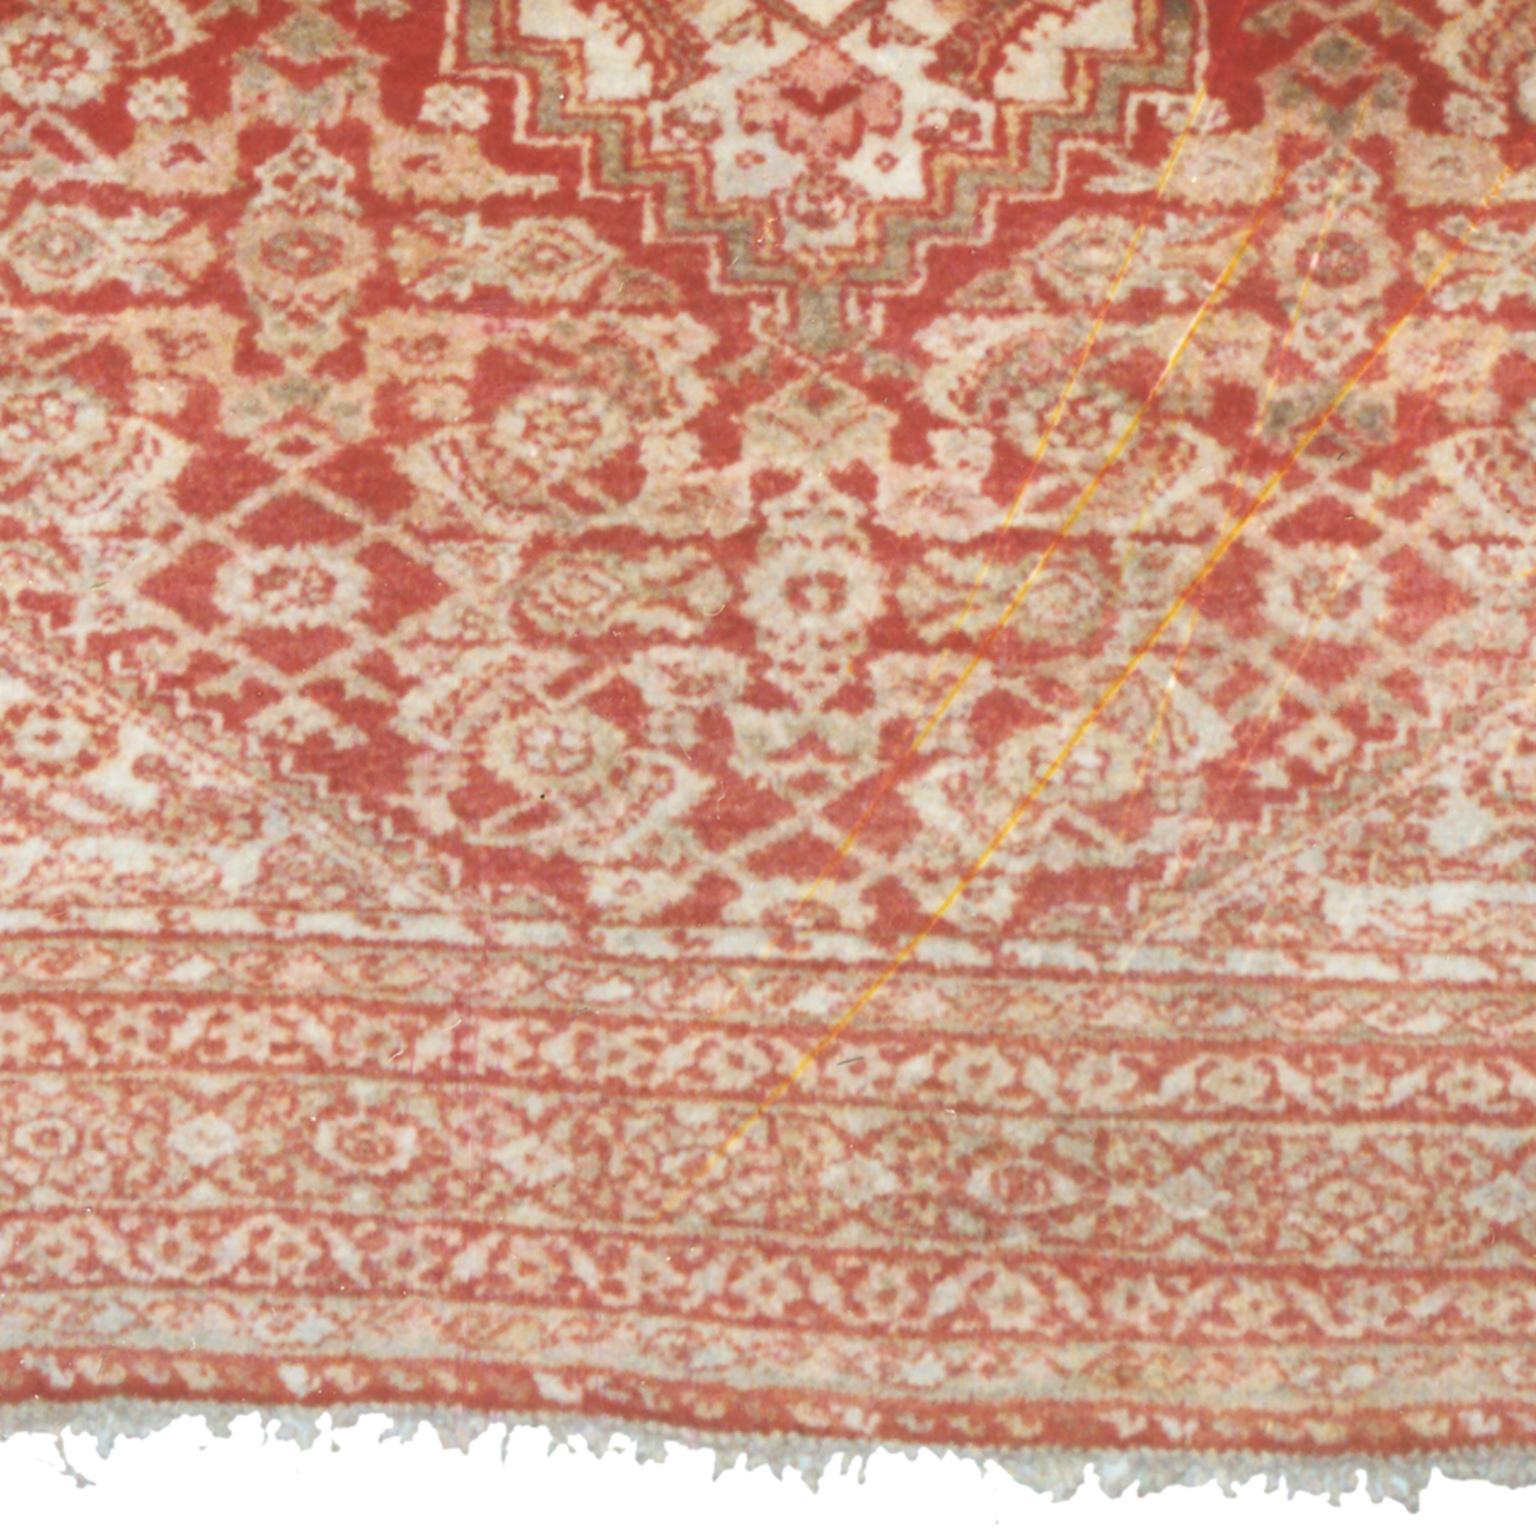 Late 19th Century Persian Sultanabad Rug In Good Condition For Sale In New York, NY